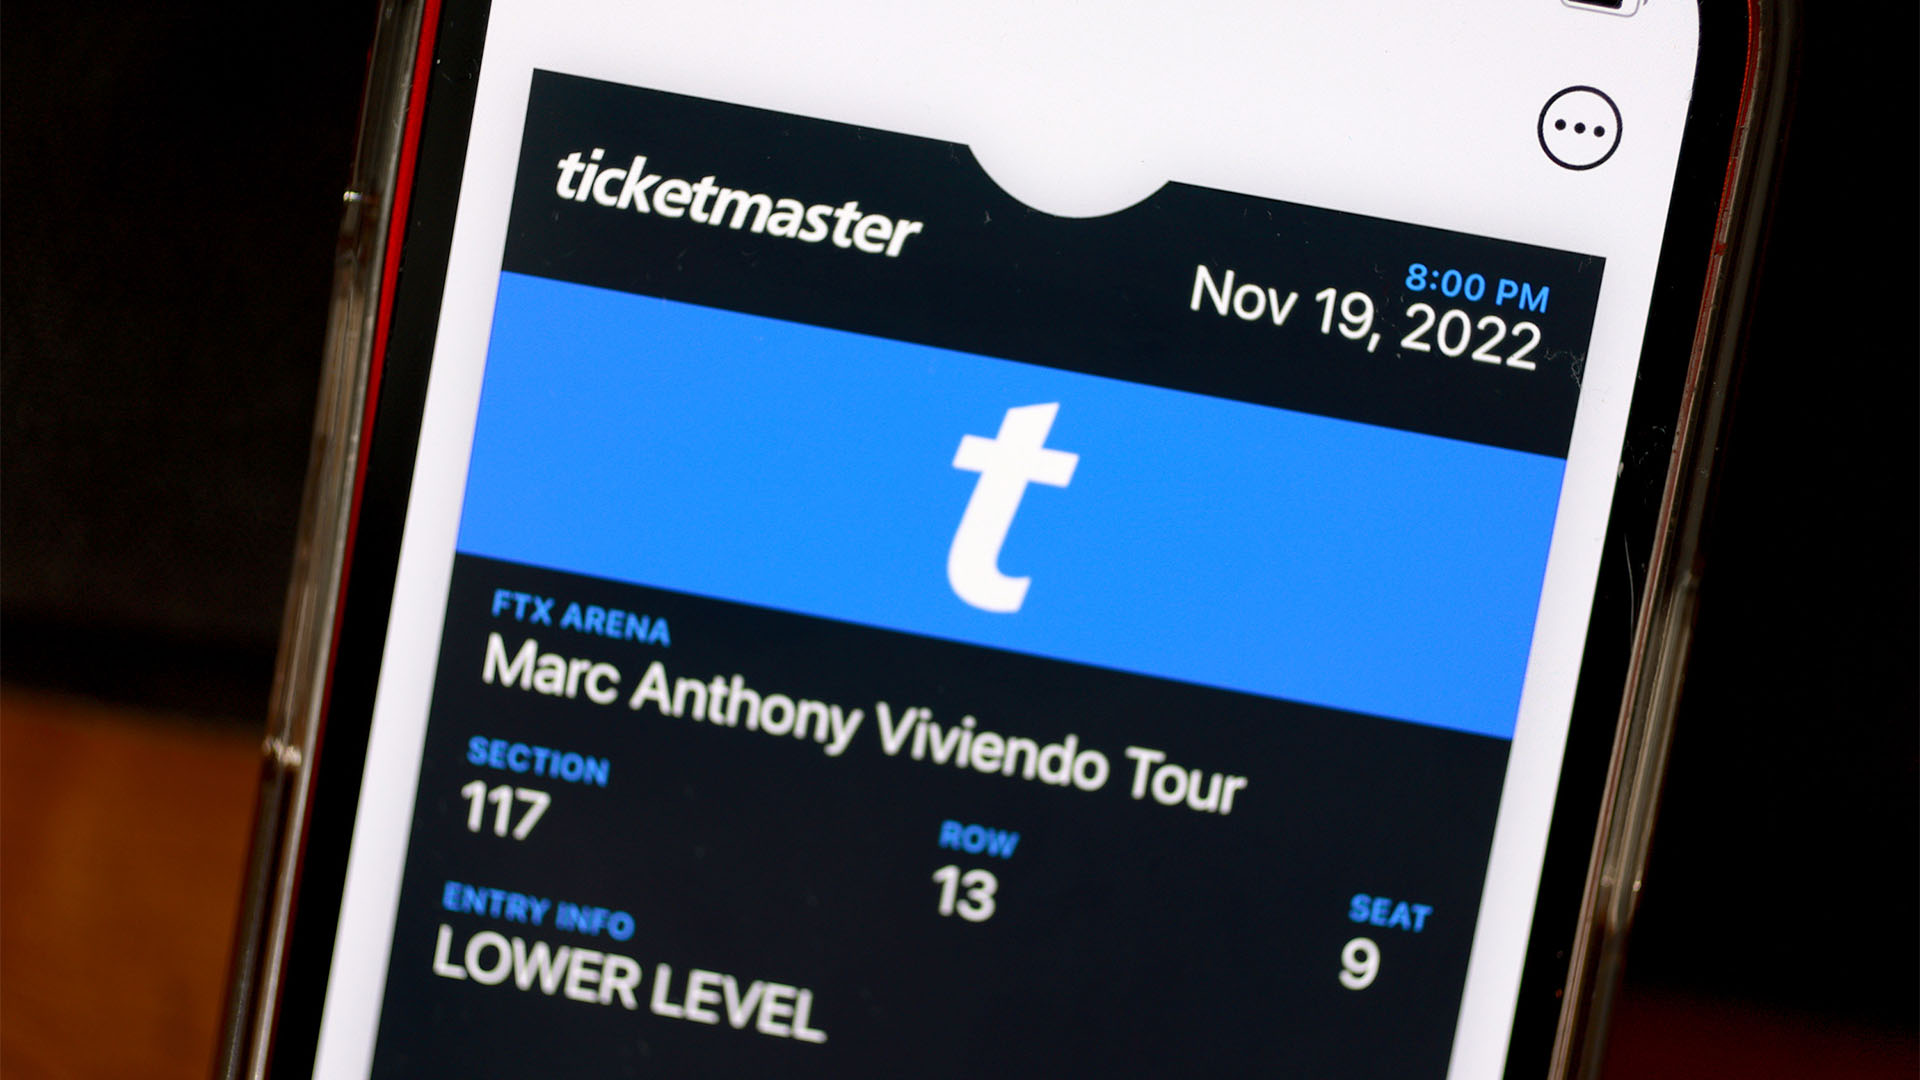 Live Nation under fire as Justice Department set to file suit over concert and ticketing practices by Ticketmaster [Video]